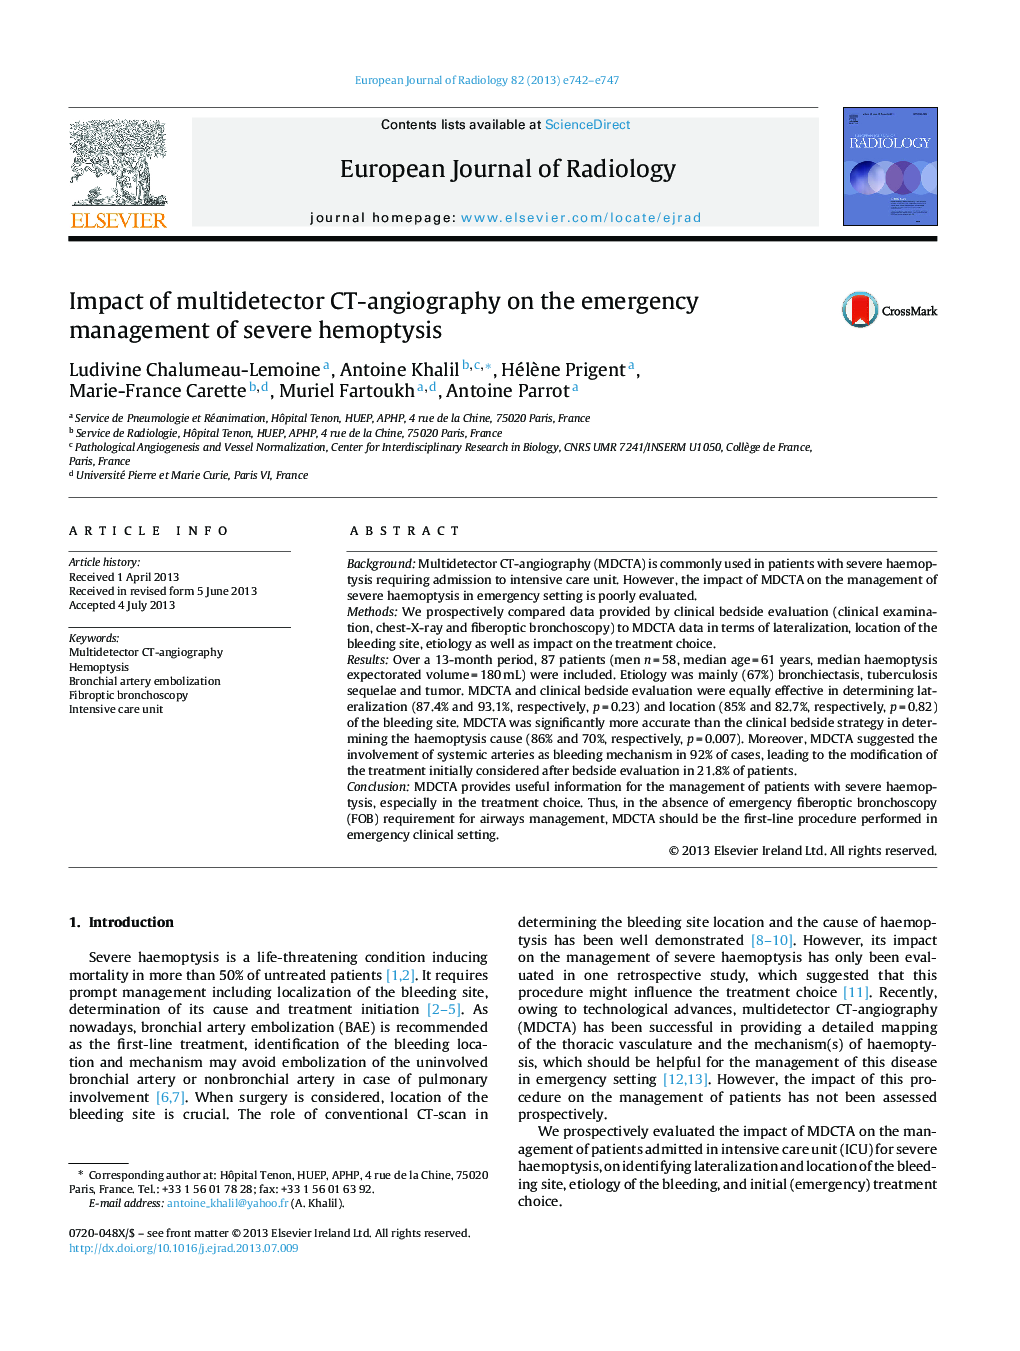 Impact of multidetector CT-angiography on the emergency management of severe hemoptysis